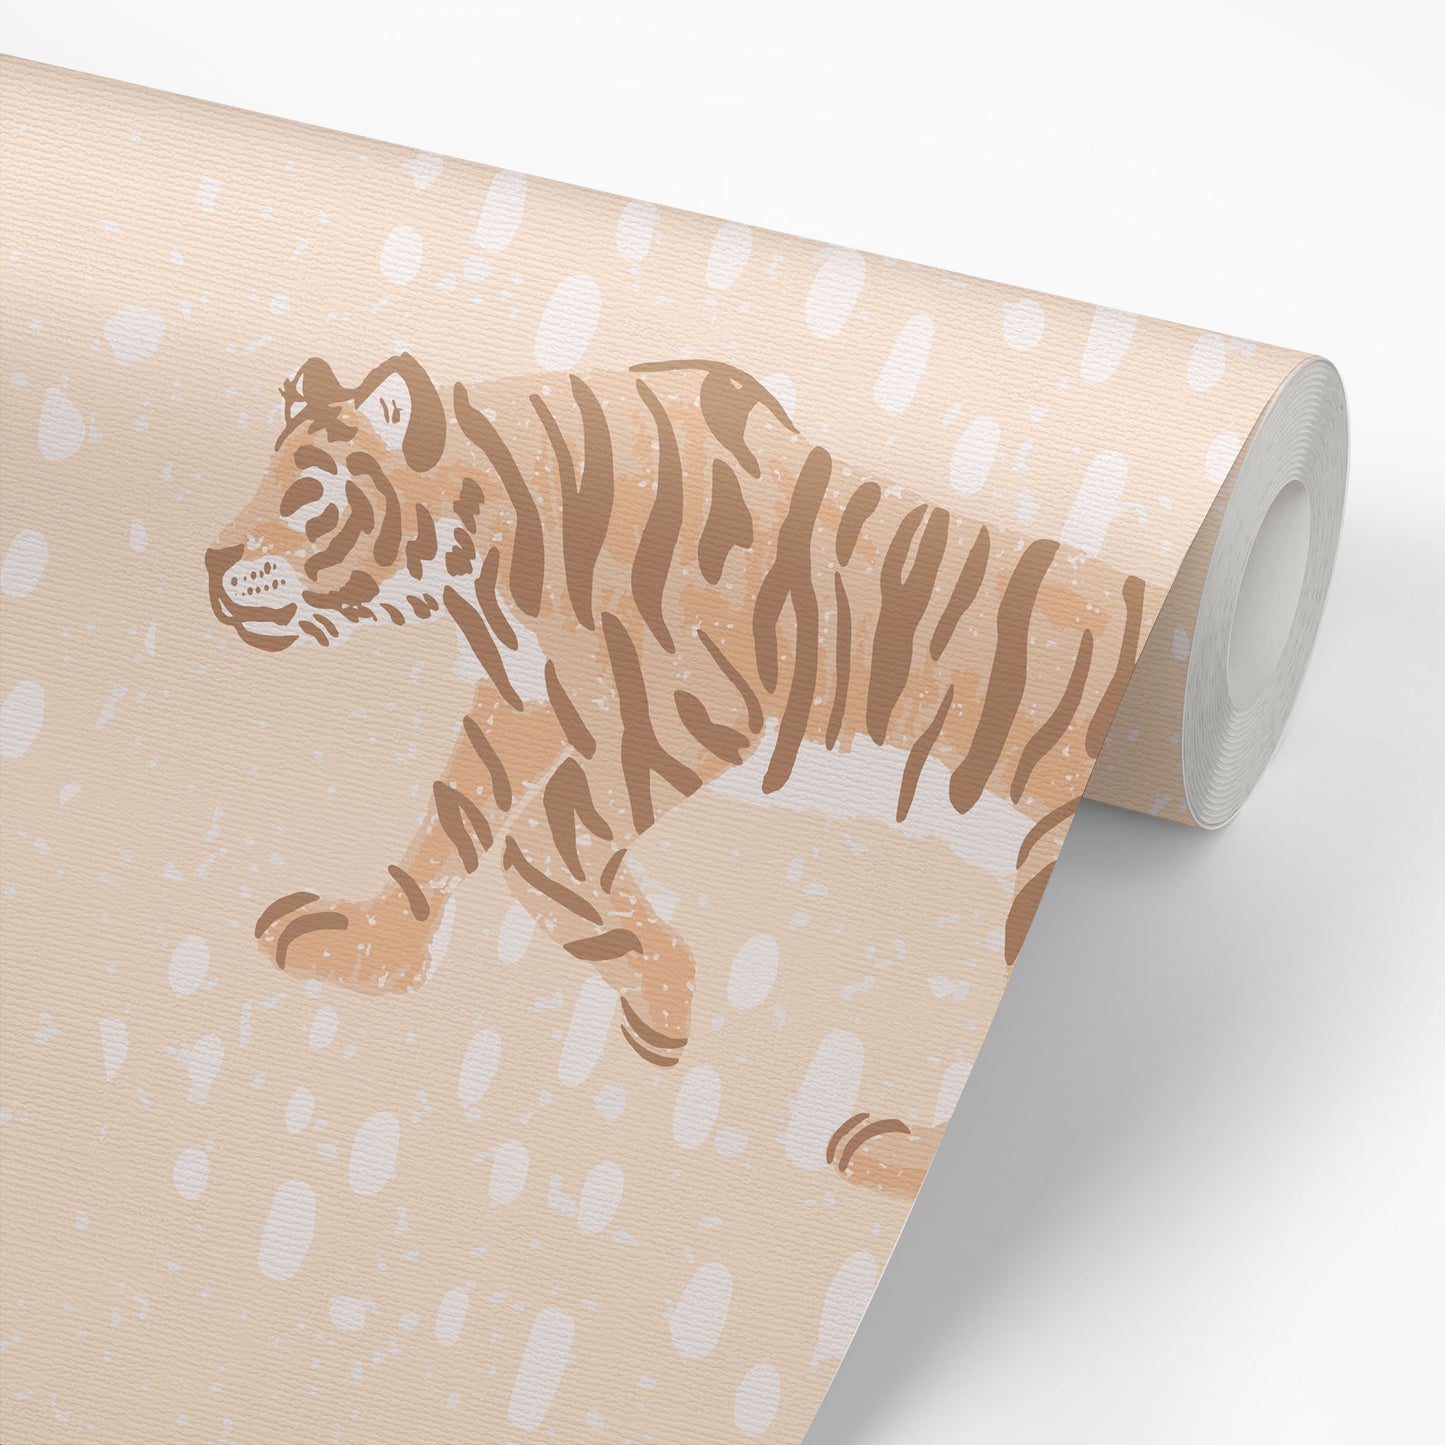 Wallpaper roll of Tiger Meadow- Tan Wallpaper perfect for a nursery or playroom space.